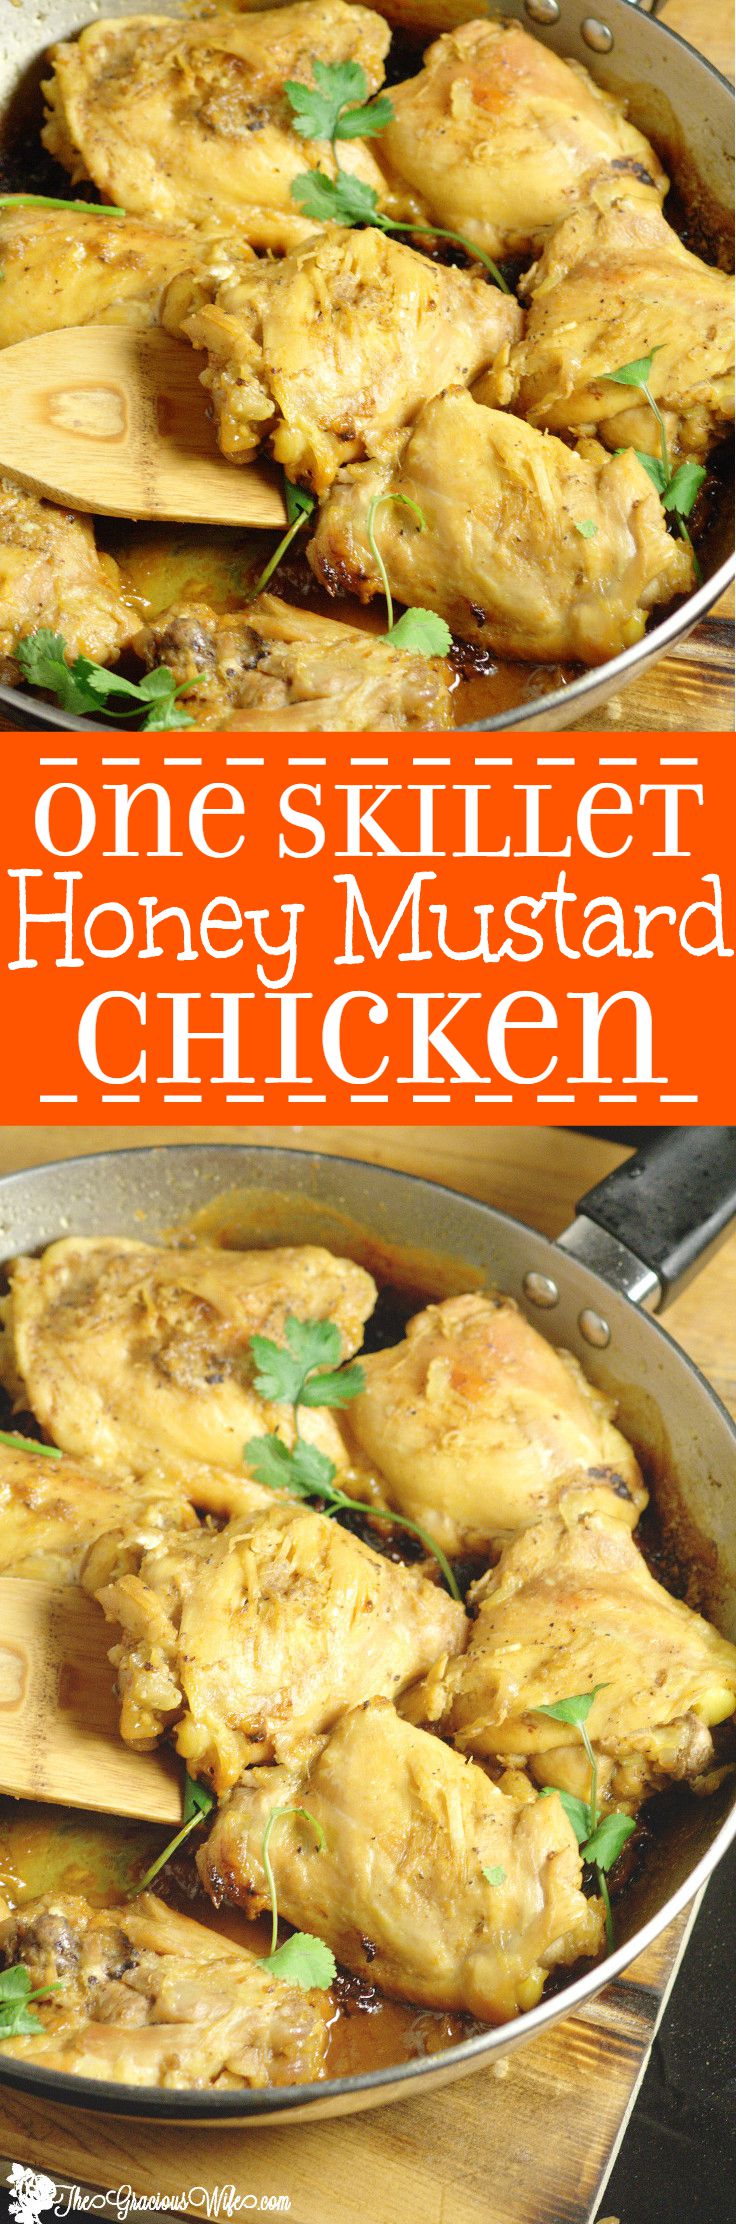 Easy Honey Mustard Chicken Recipe- A sweet and tangy quick and easy dinner idea recipe. Make it all in 30 minutes in one pot!! So good!